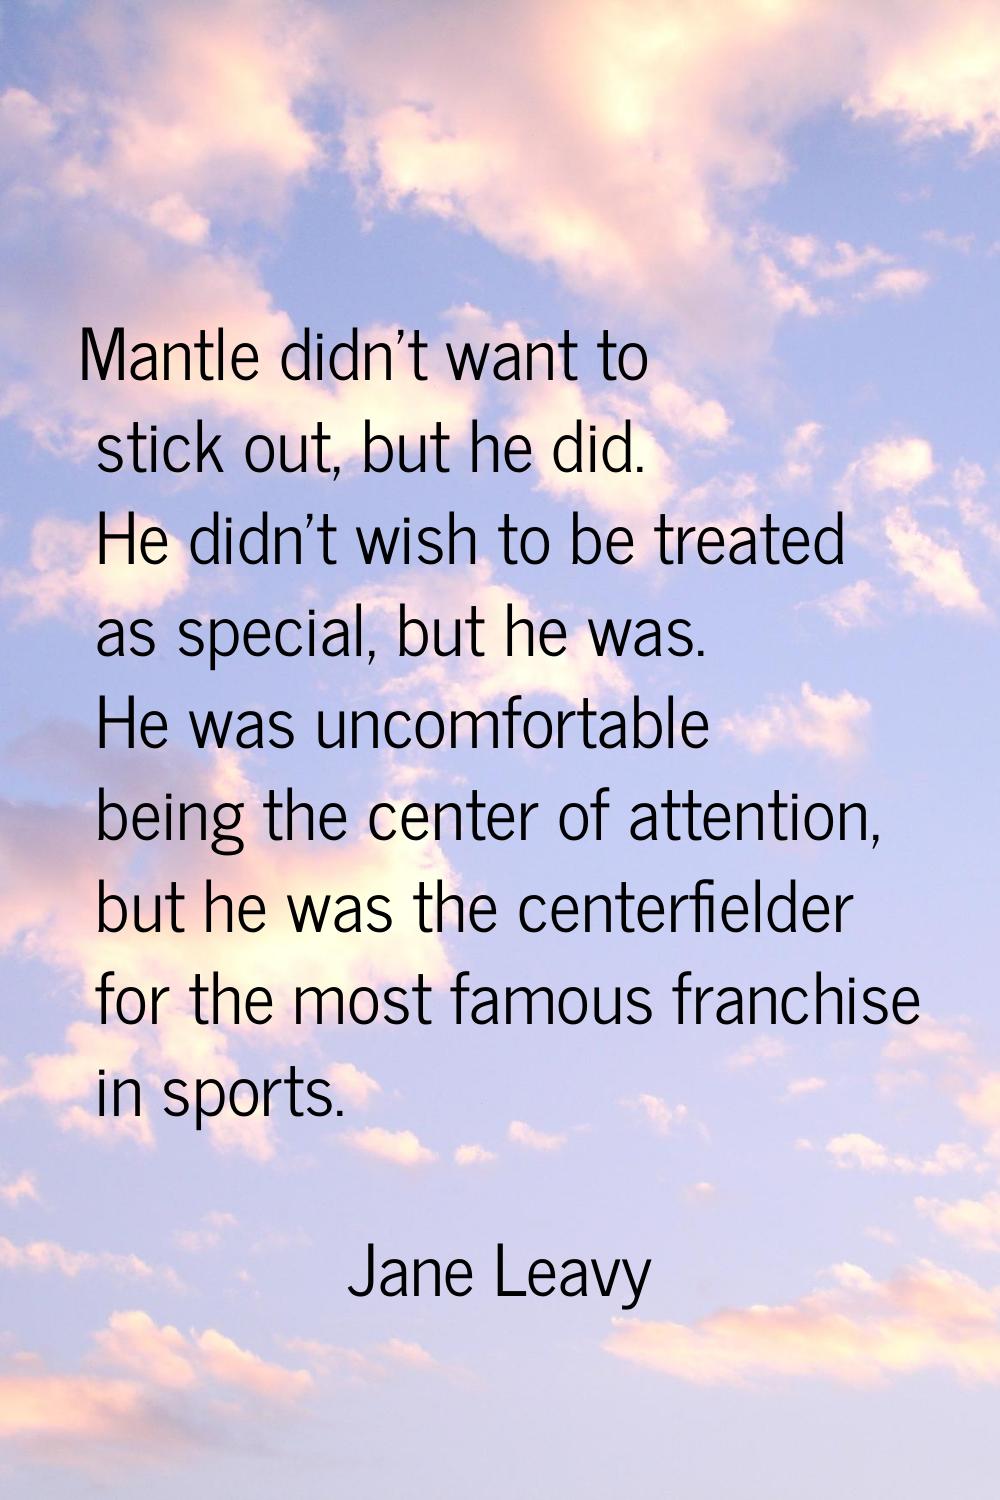 Mantle didn't want to stick out, but he did. He didn't wish to be treated as special, but he was. H